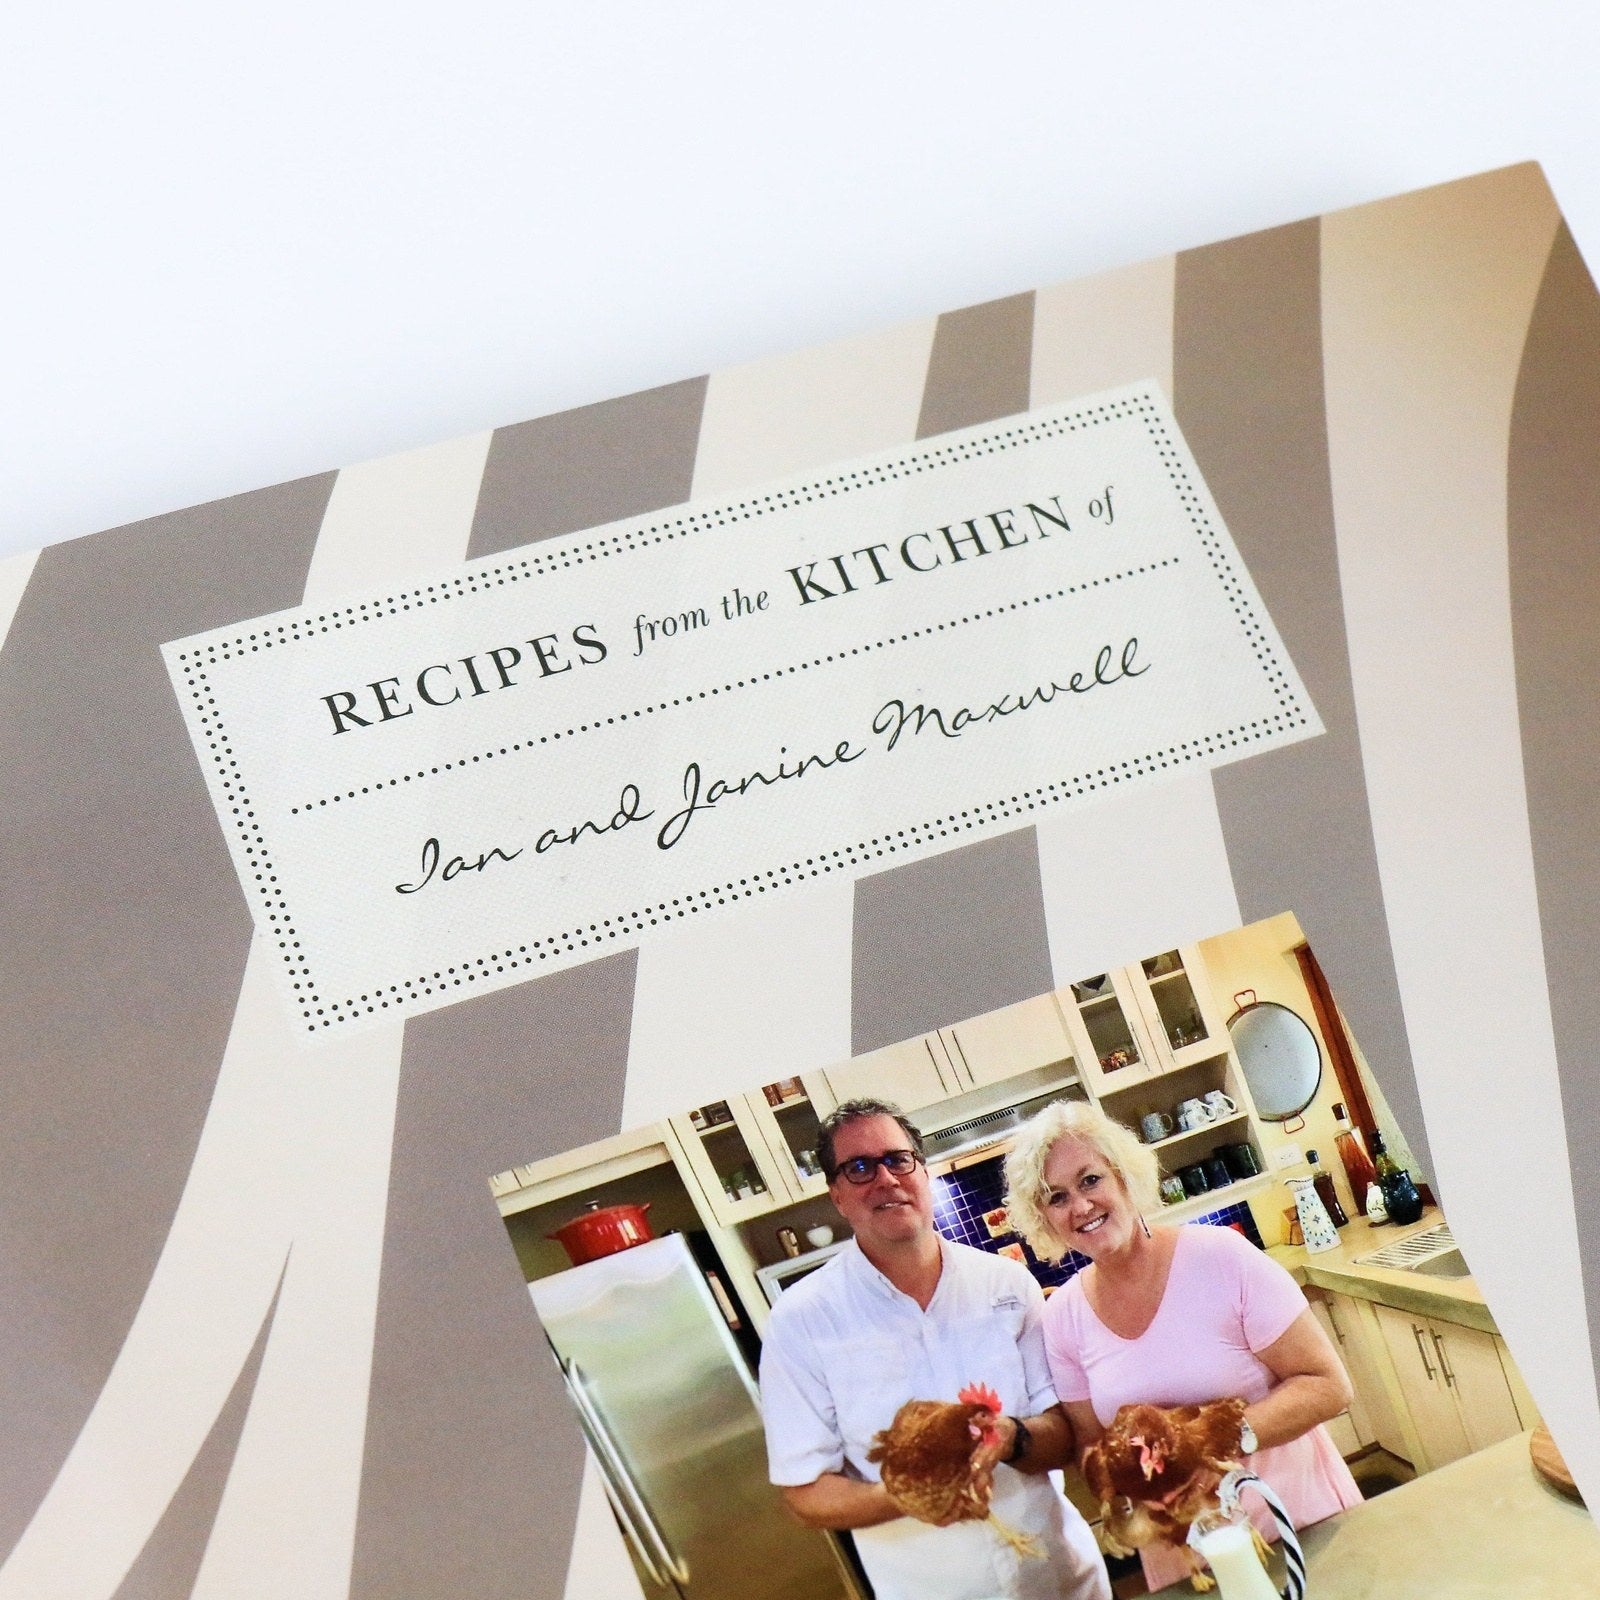 Recipes from the Kitchen of Ian and Janine Maxwell - Khutsala™ Artisans